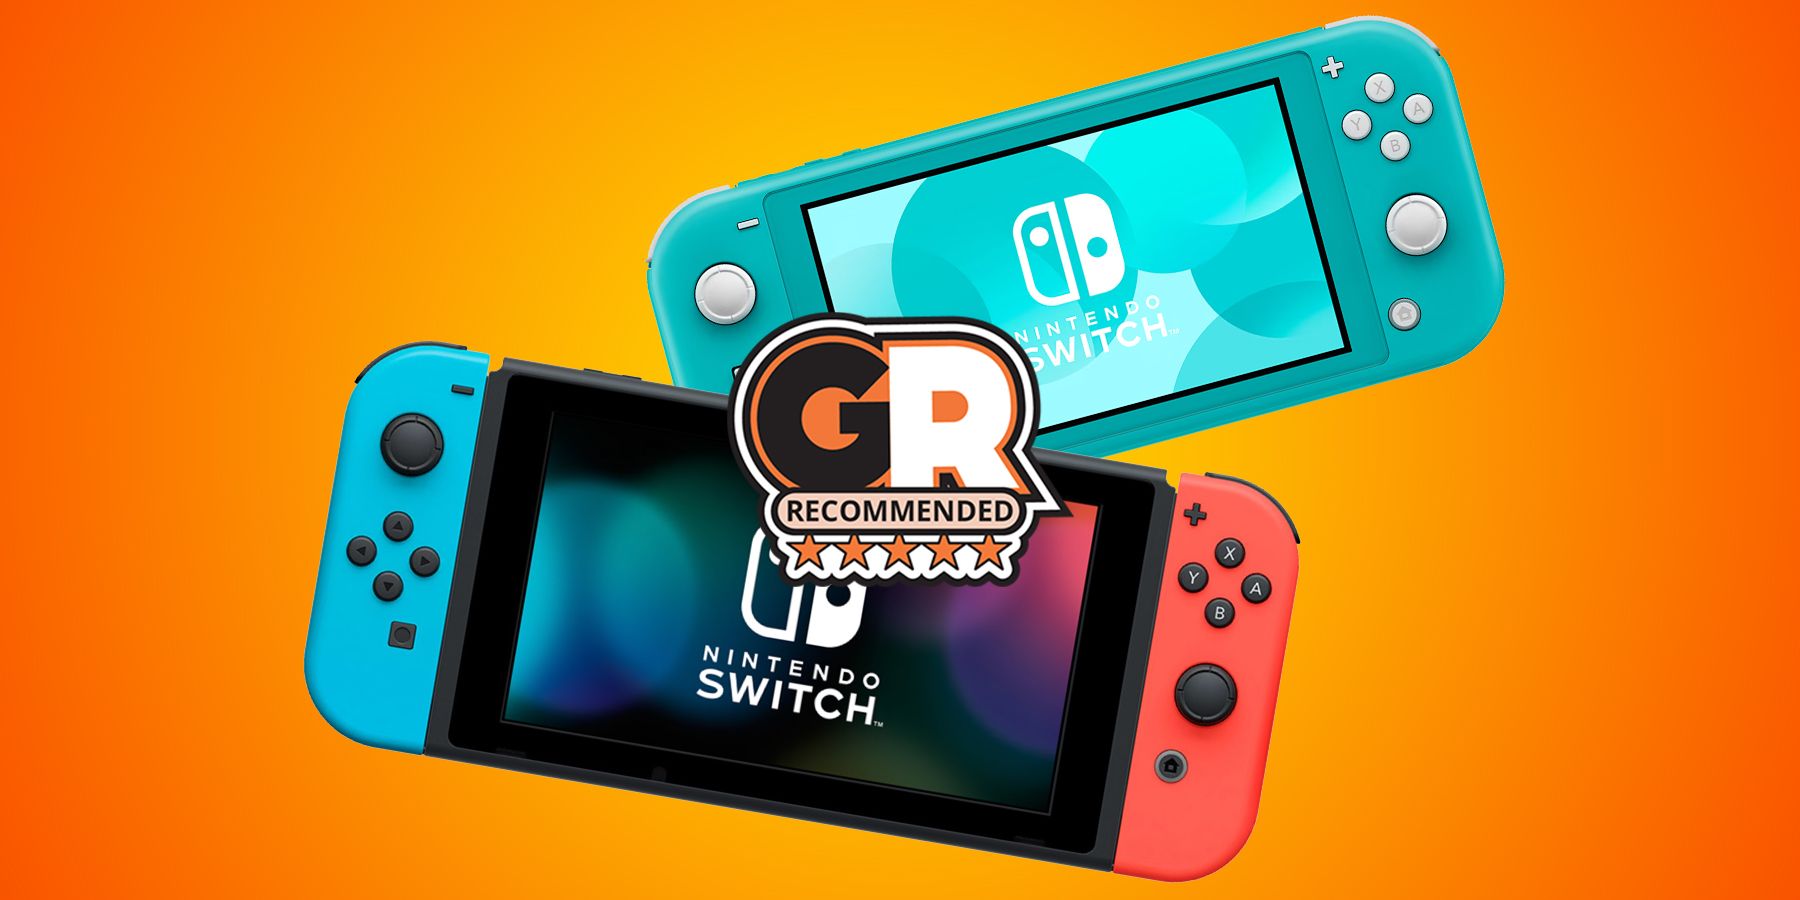 Nintendo Switch vs Switch Lite: Which is Better?